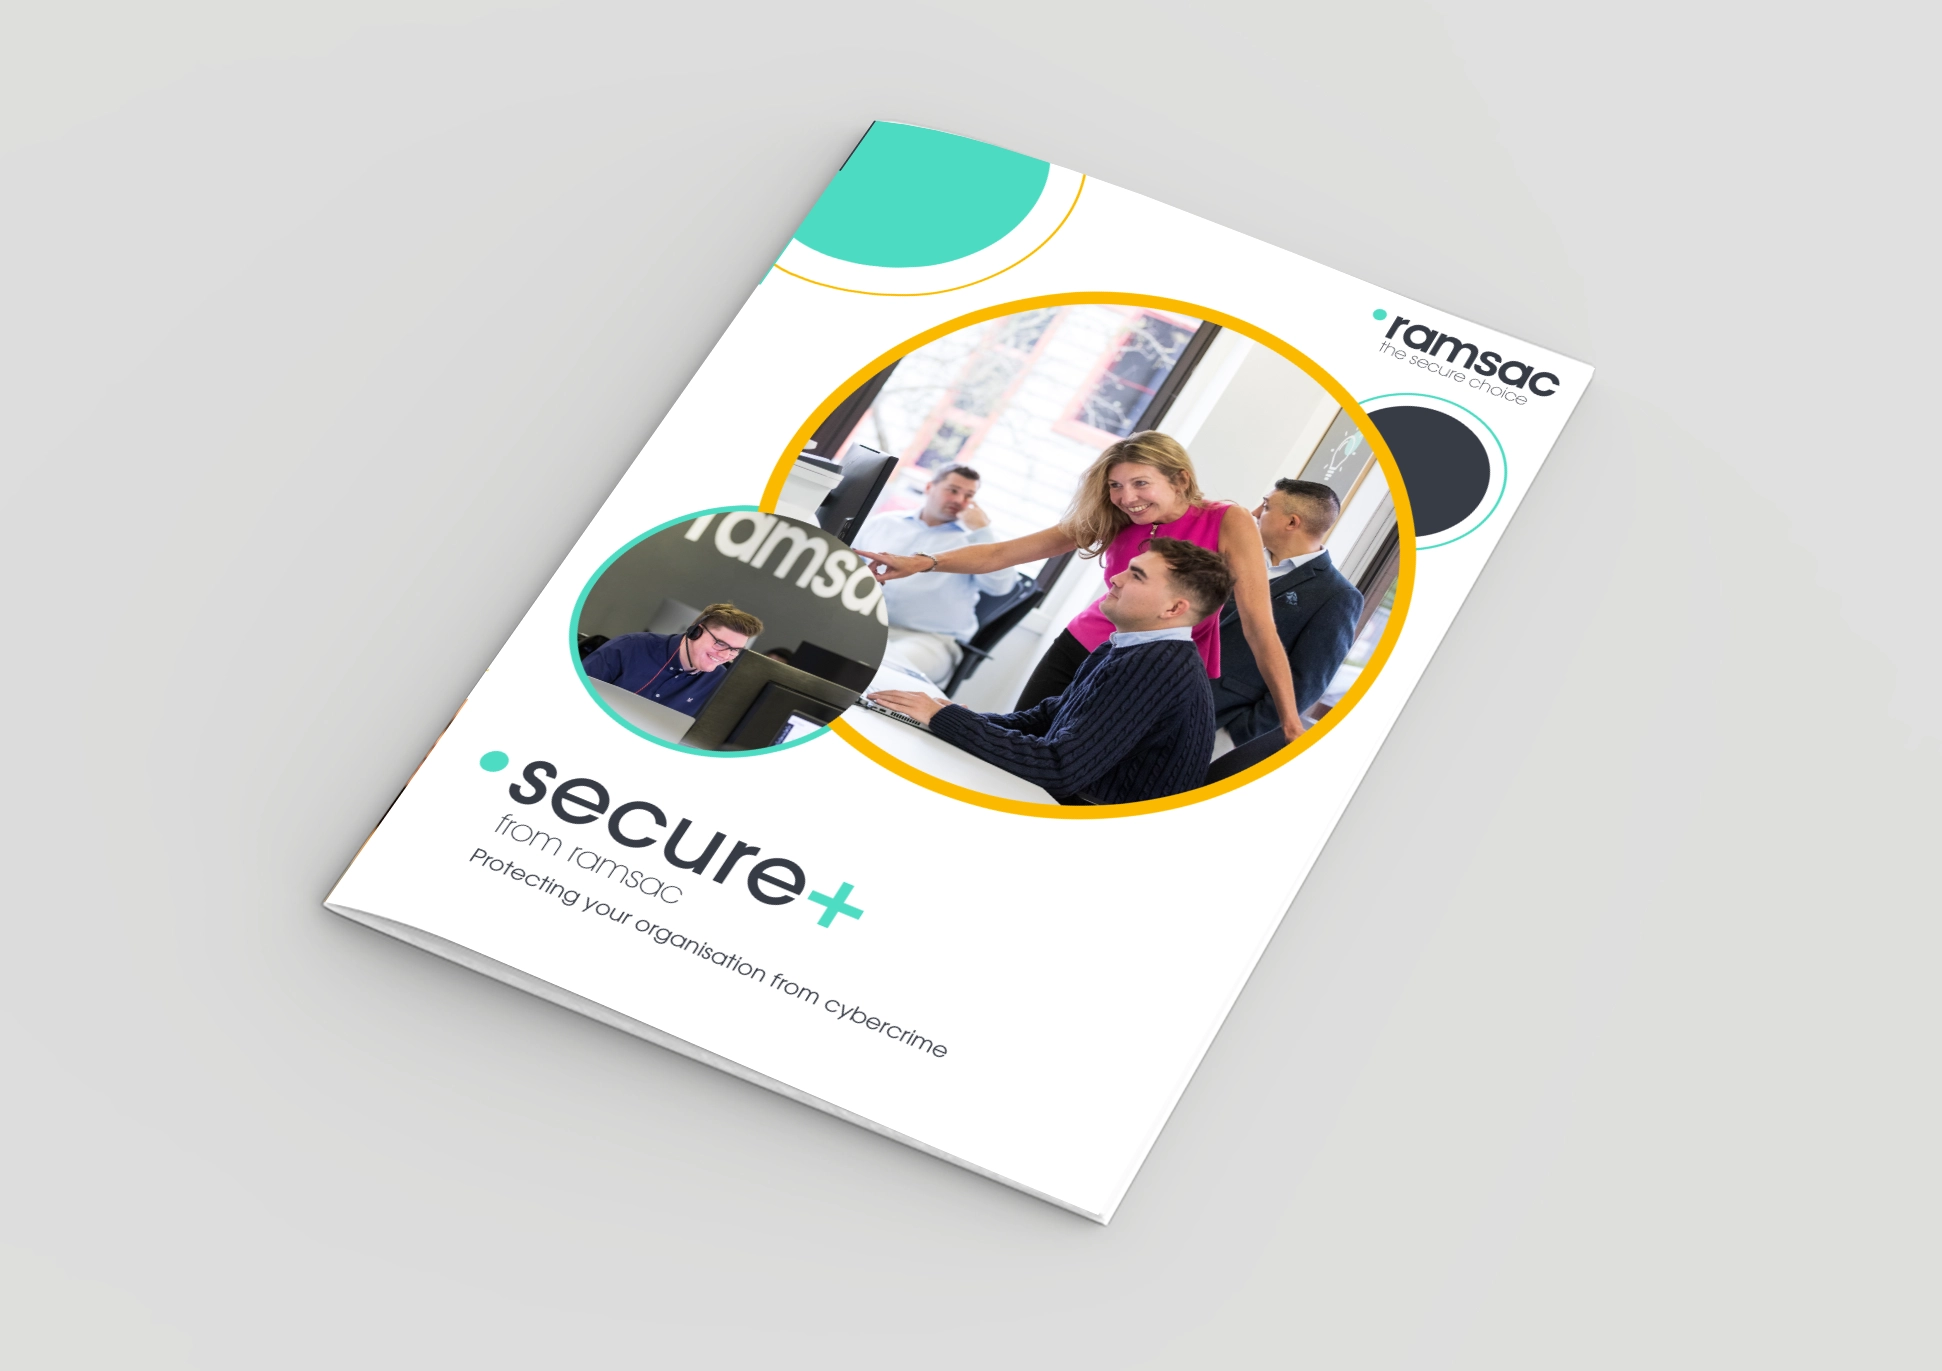 Introducing Secure+ from ramsac: Keeping a watchful eye on your IT estate